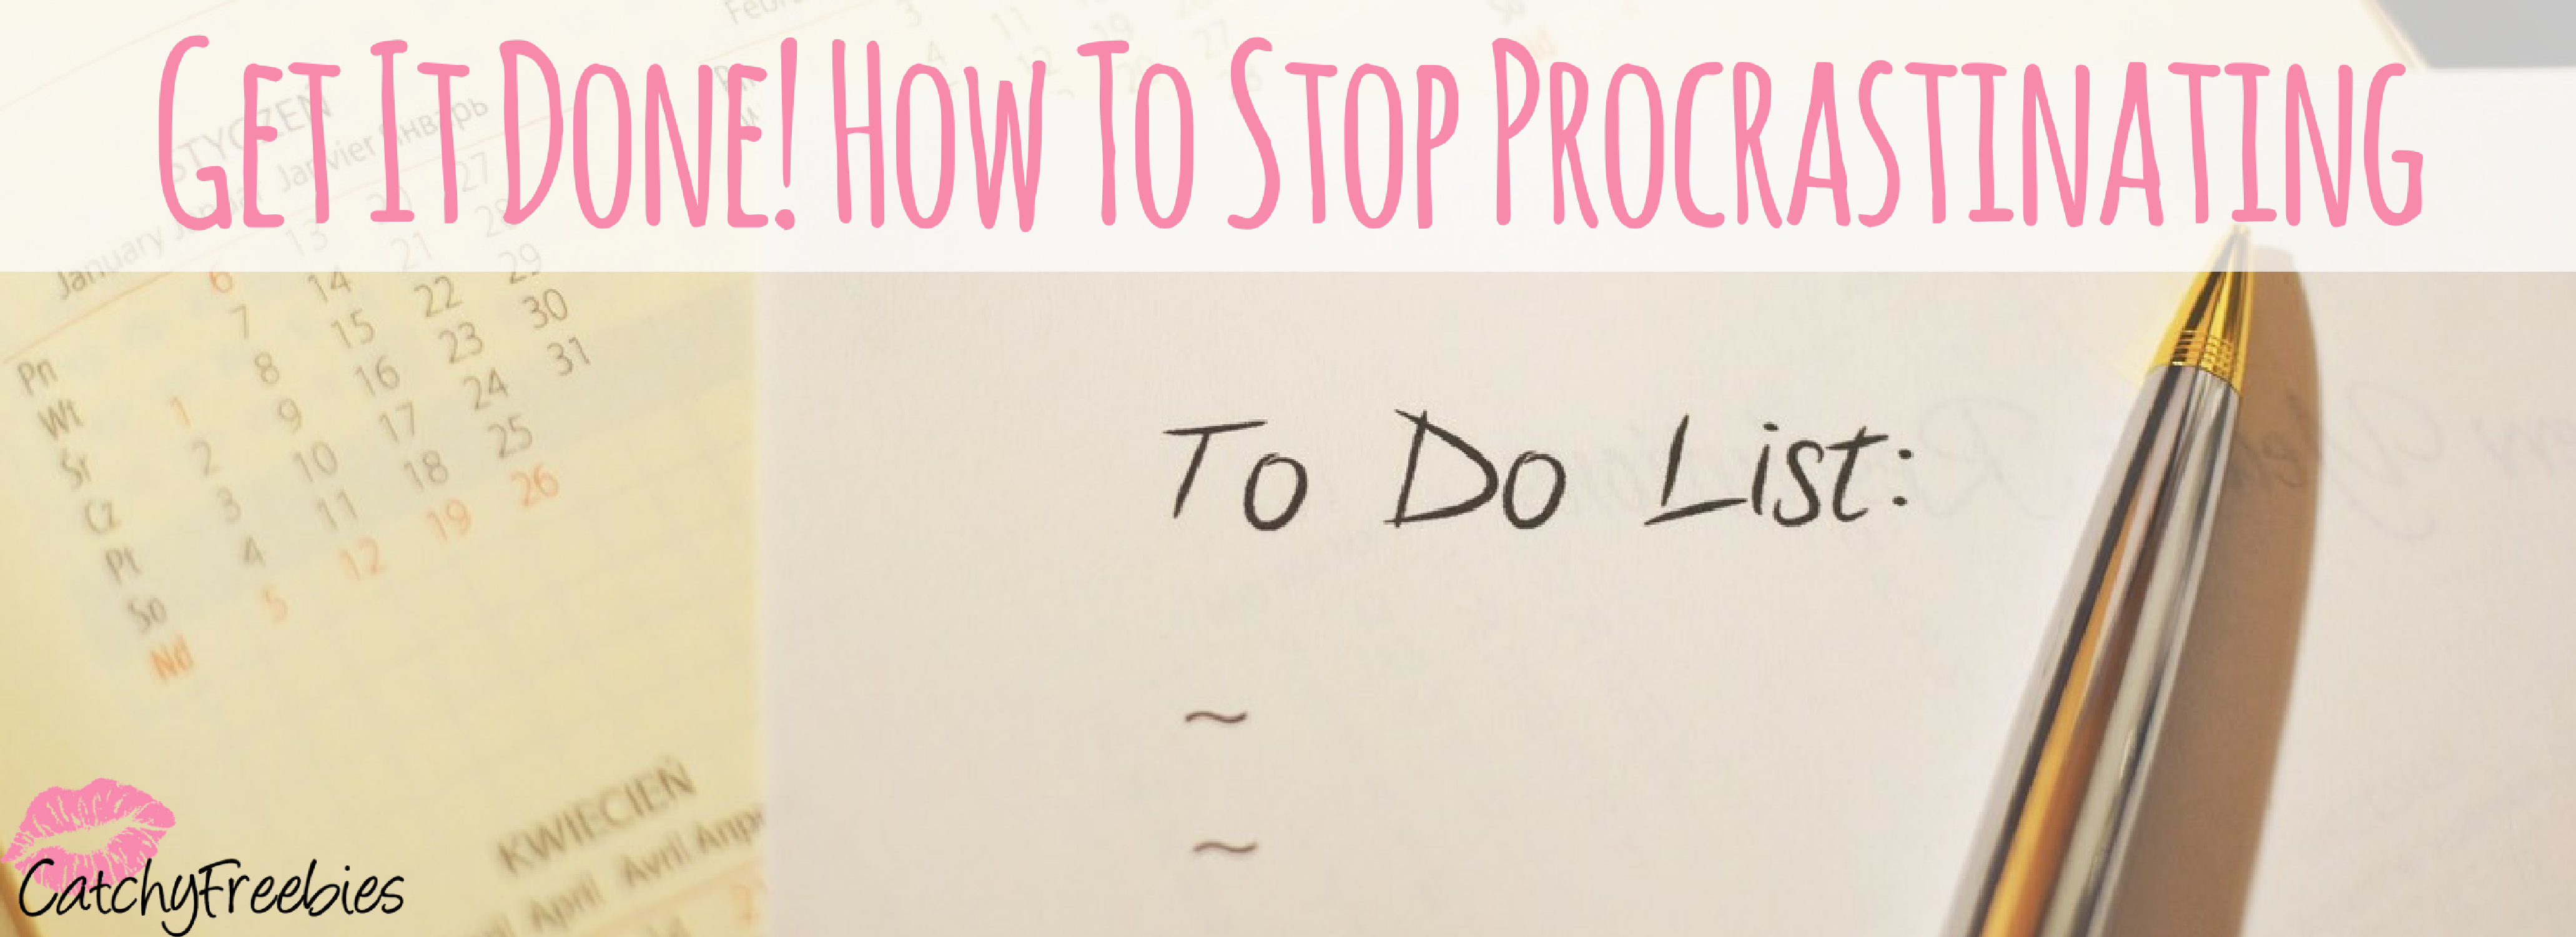 Get It Done! How To Stop Procrastinating